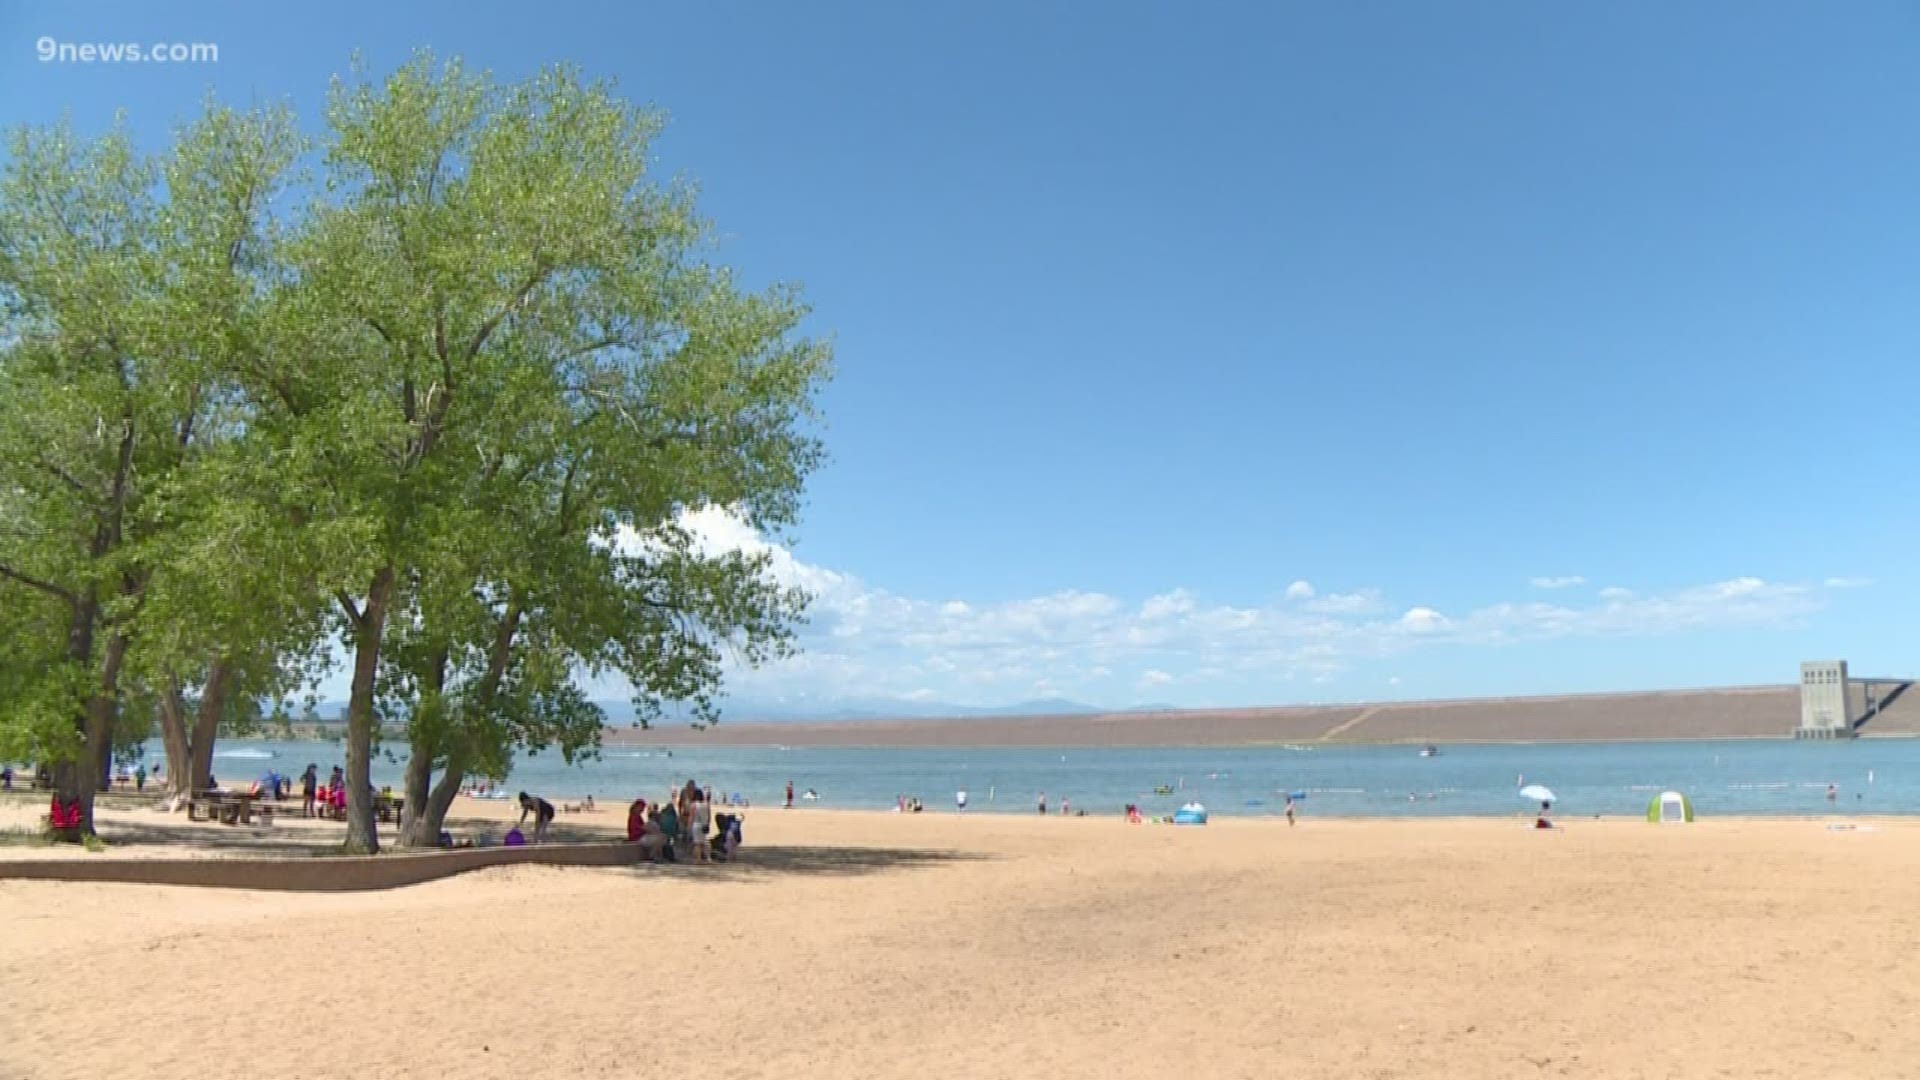 A child was rescued Sunday afternoon from the swim beach at Cherry Creek Reservoir, according to South Metro Fire Rescue.